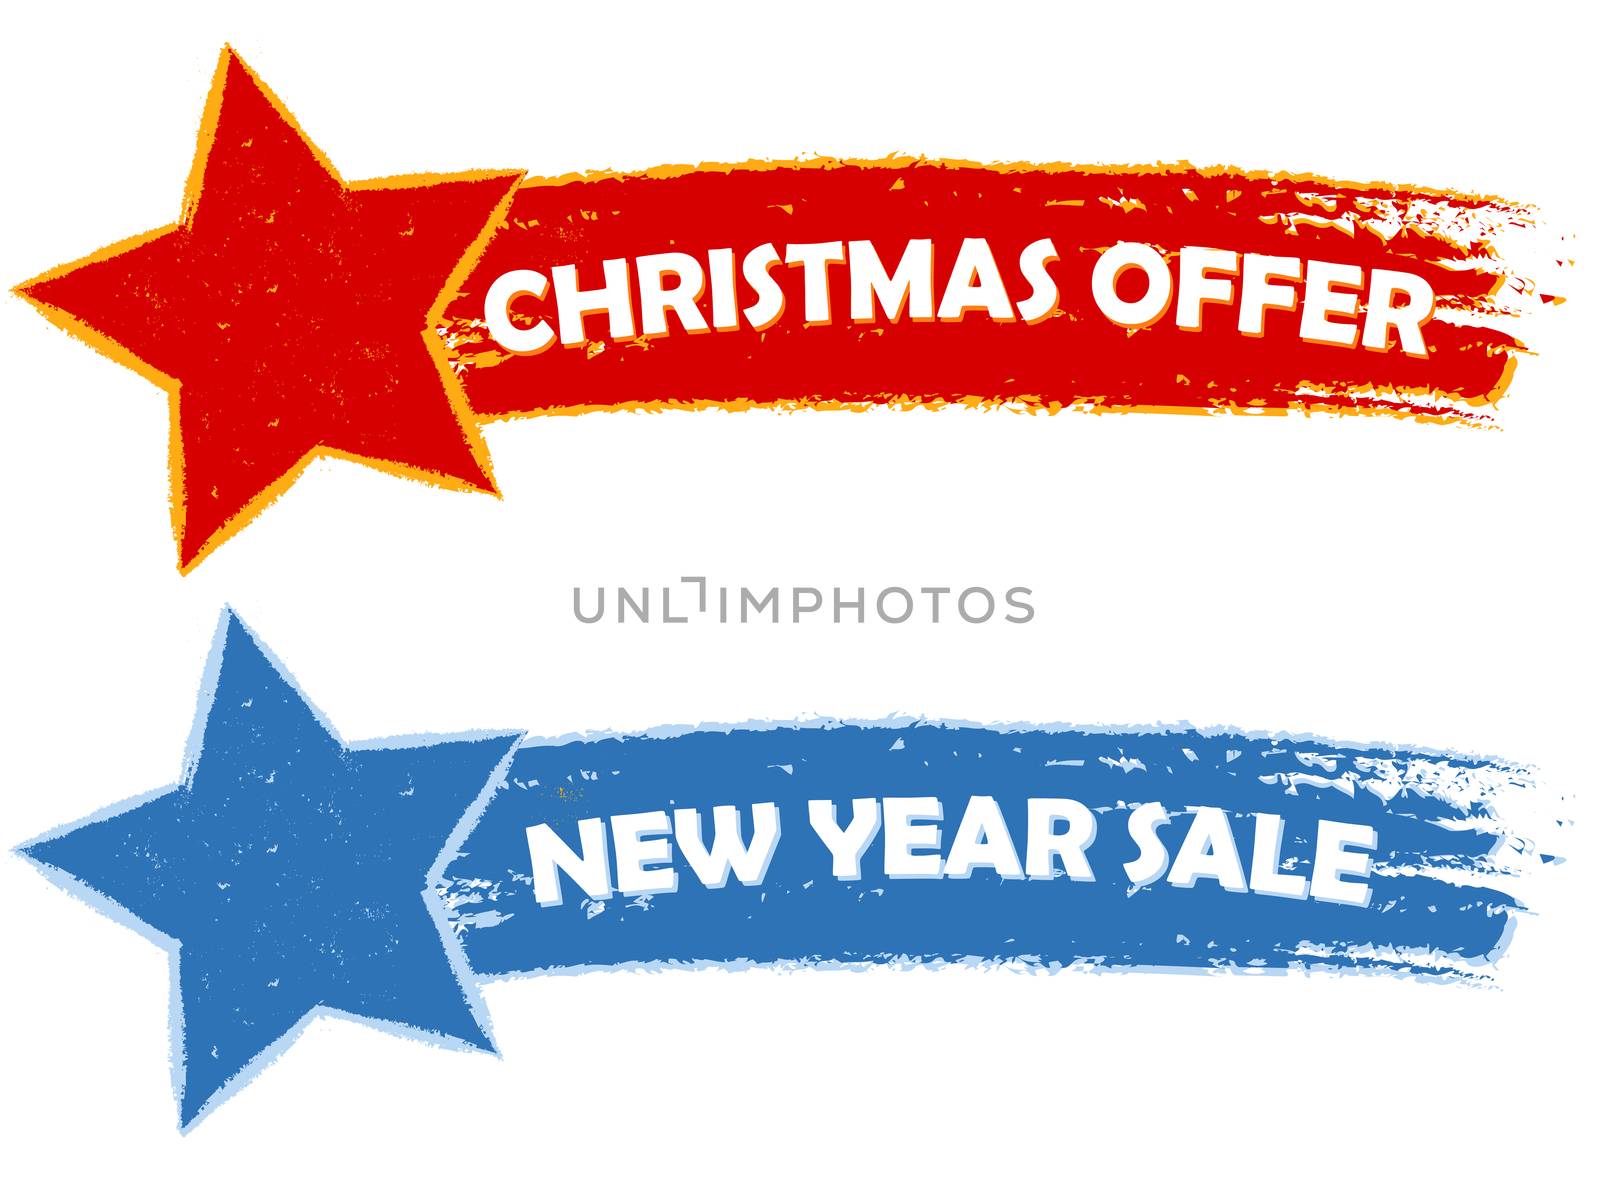 Christmas offer, new year sale - two drawn banners